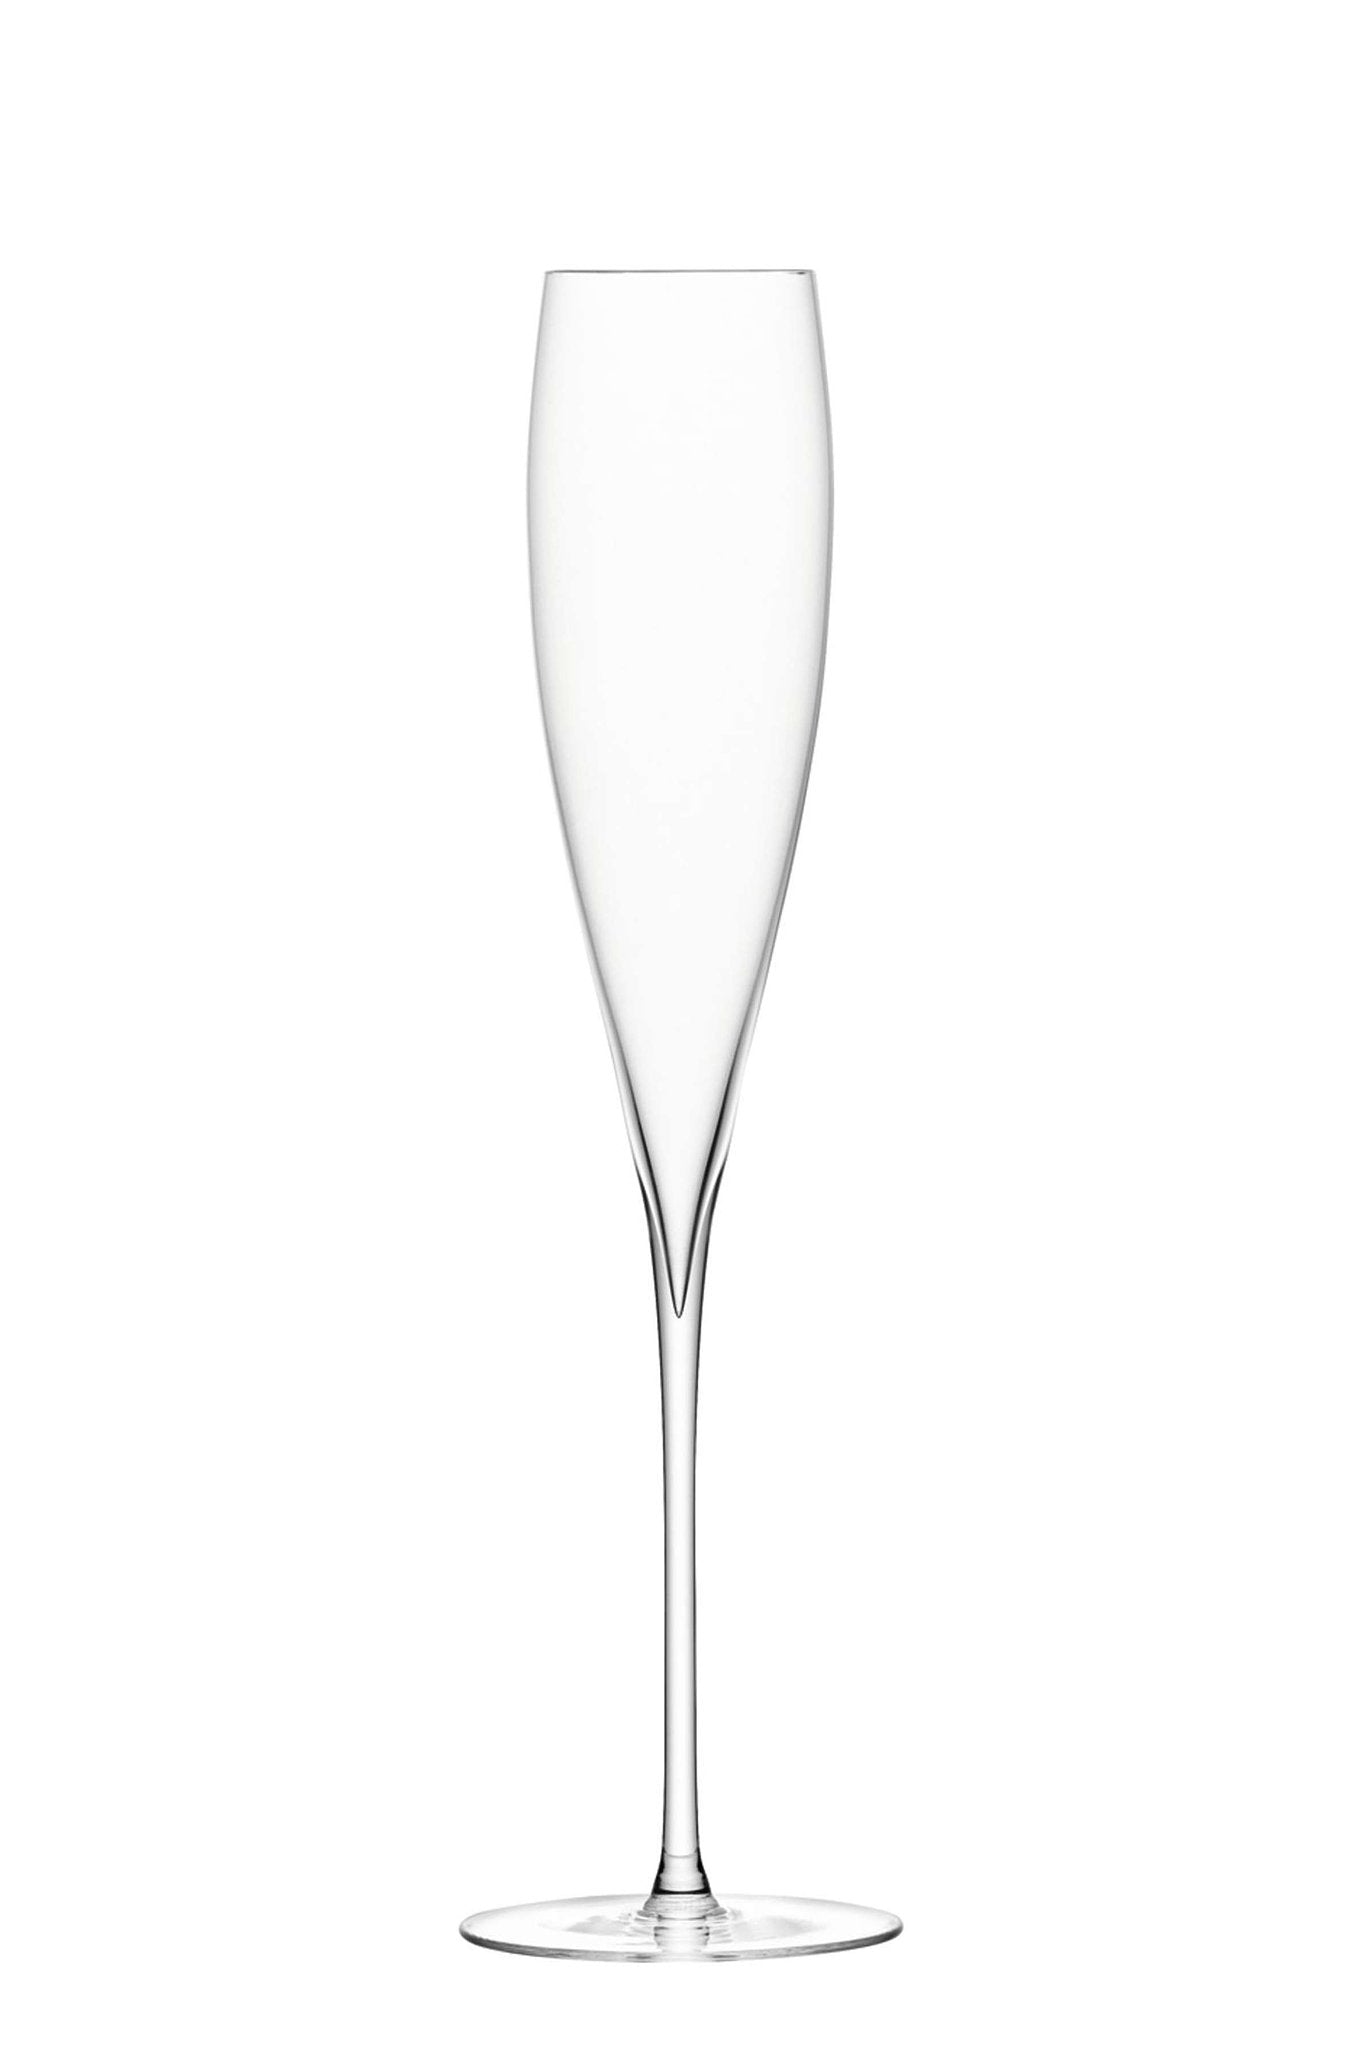 L.S.A. Savoy Champagne Glass 200 ml Set of 2 Pieces